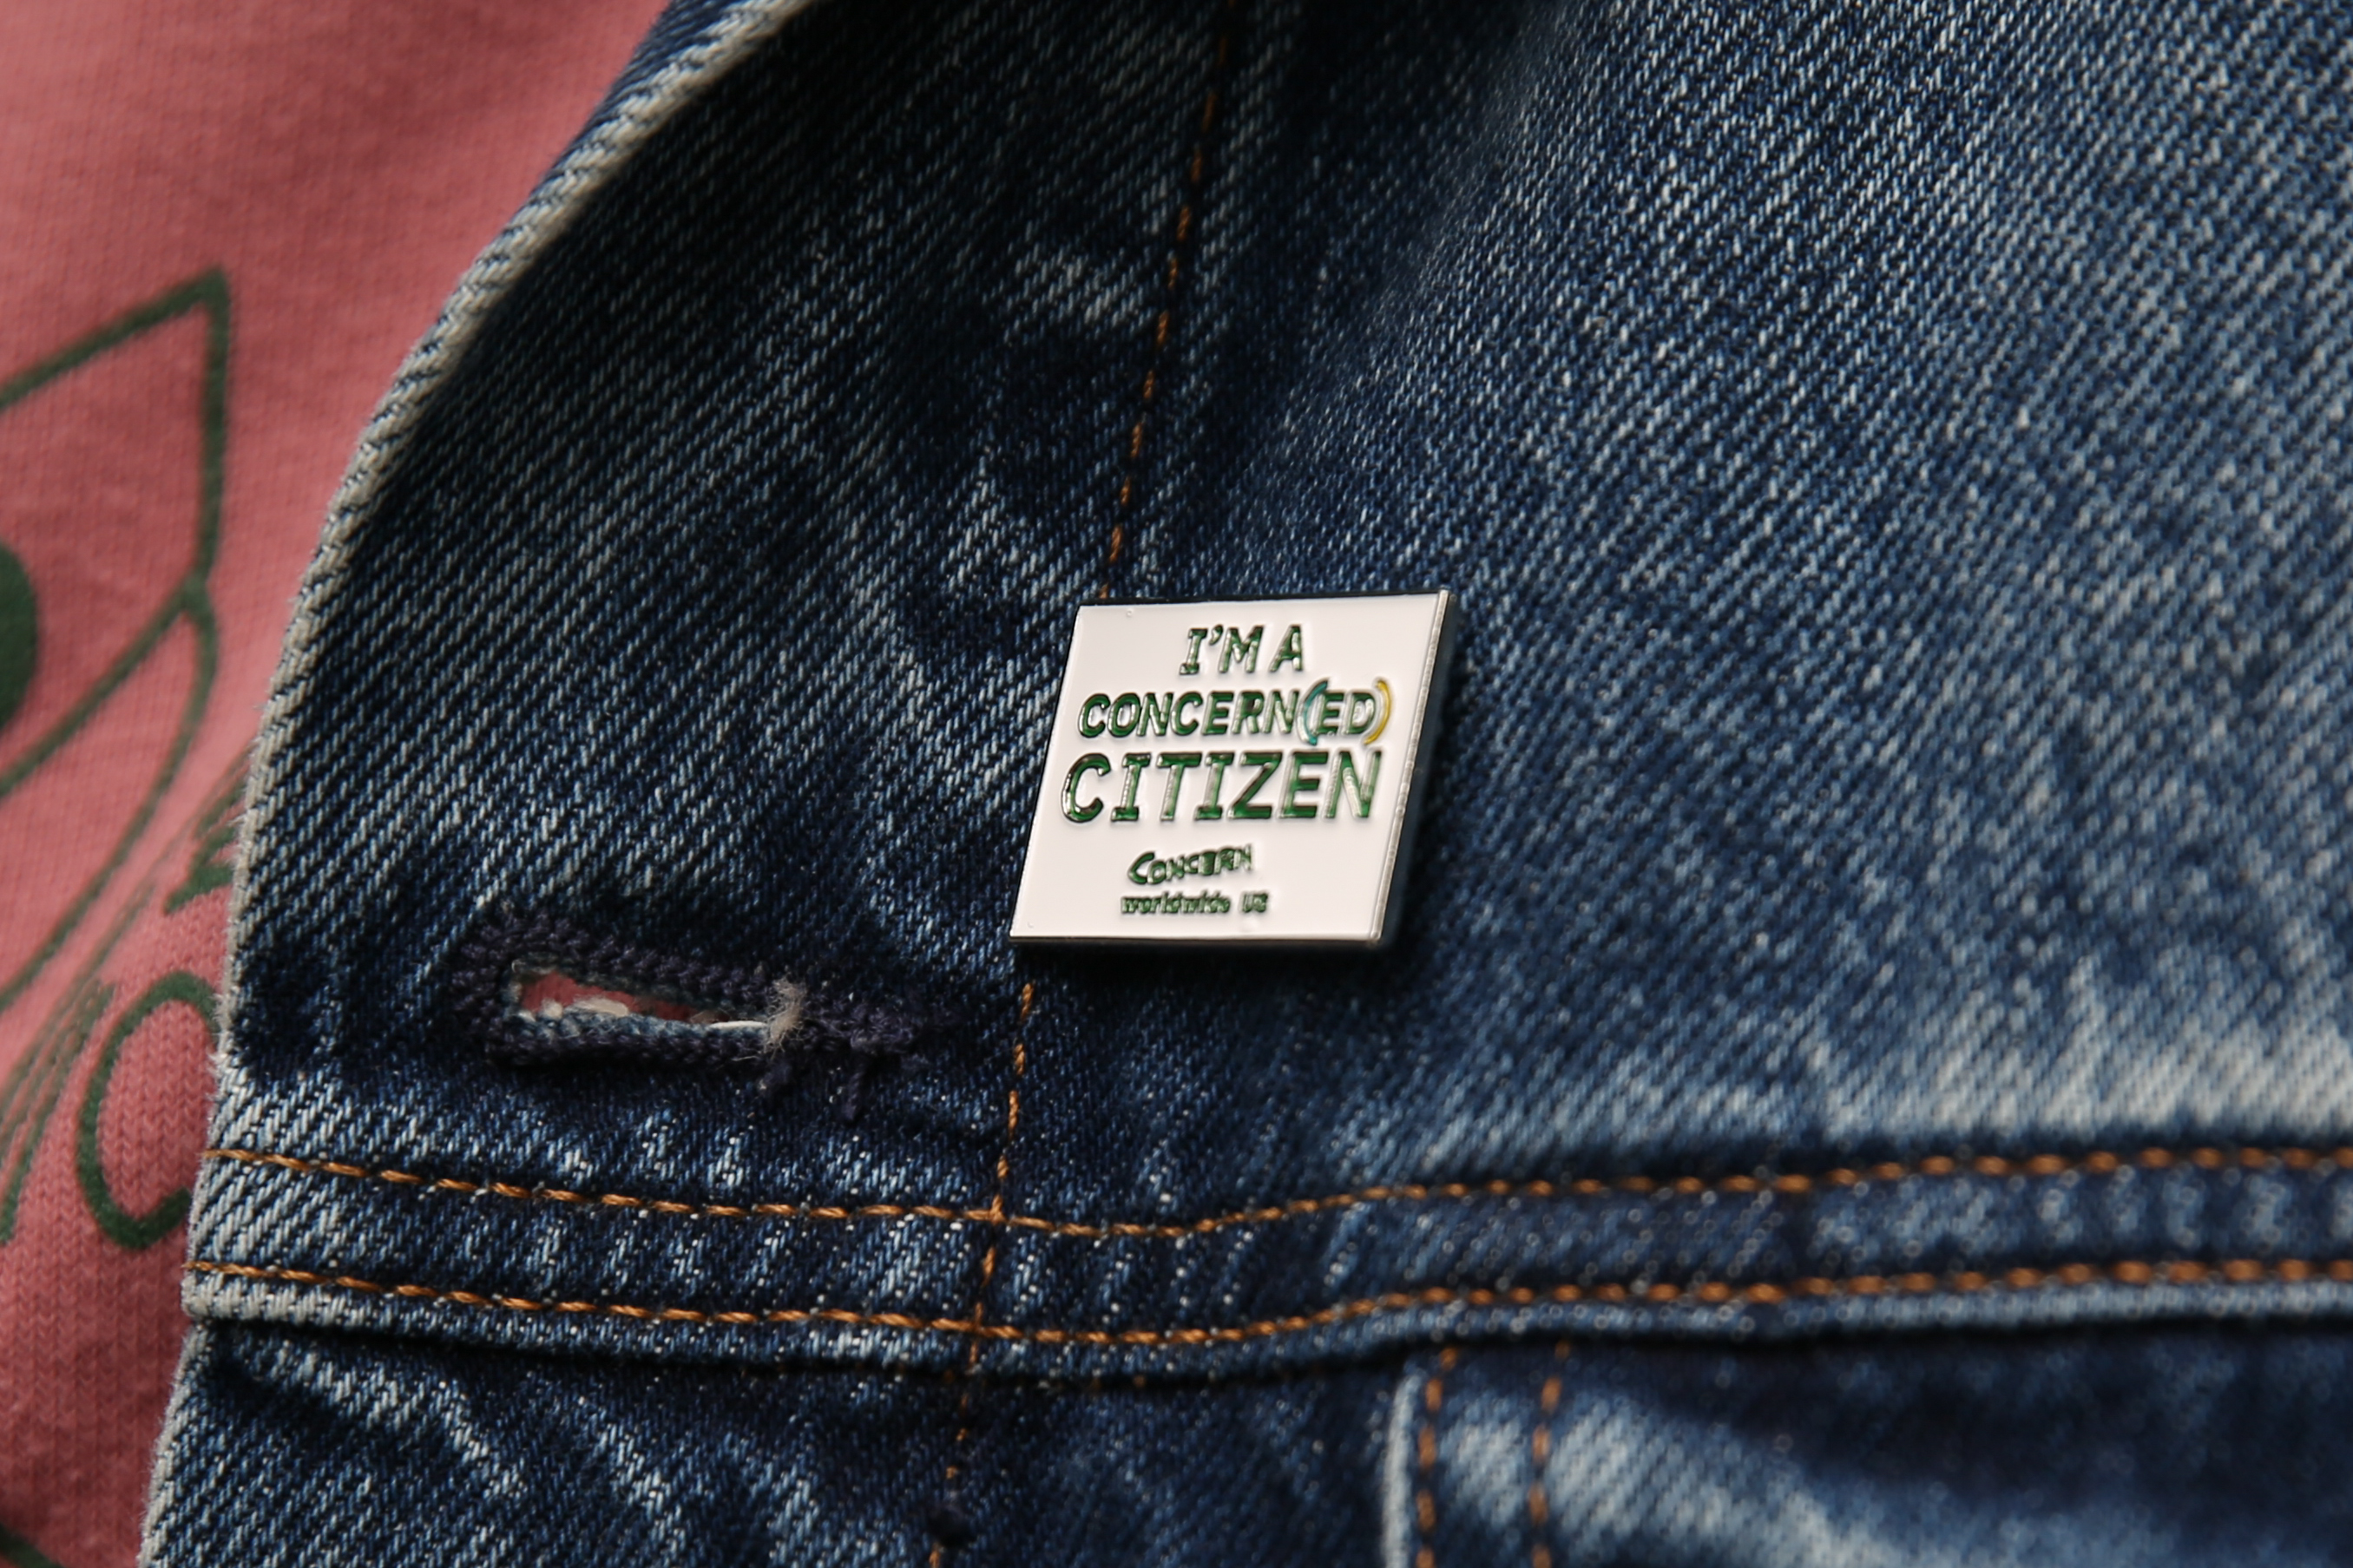 The Concerned Citizen pin